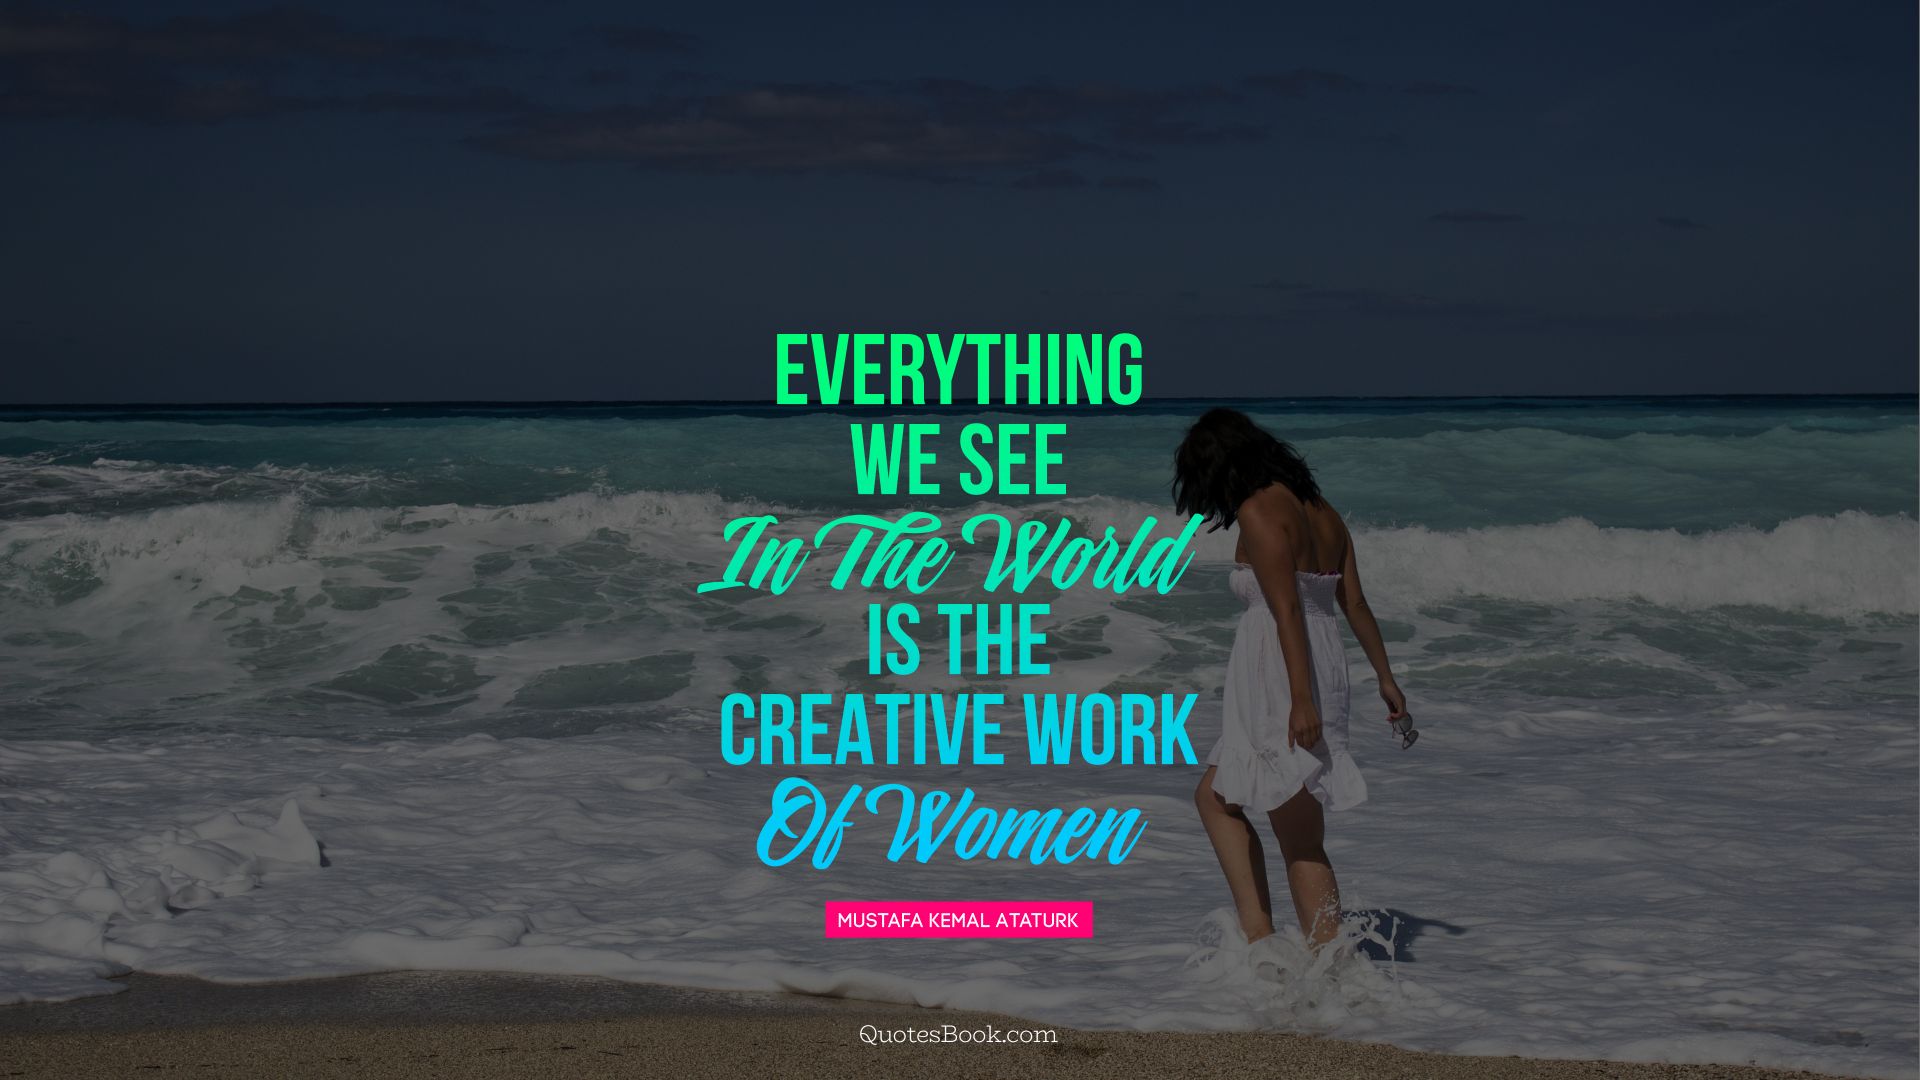 Everything we see in the world is the creative work of women. - Quote by Mustafa Kemal Ataturk